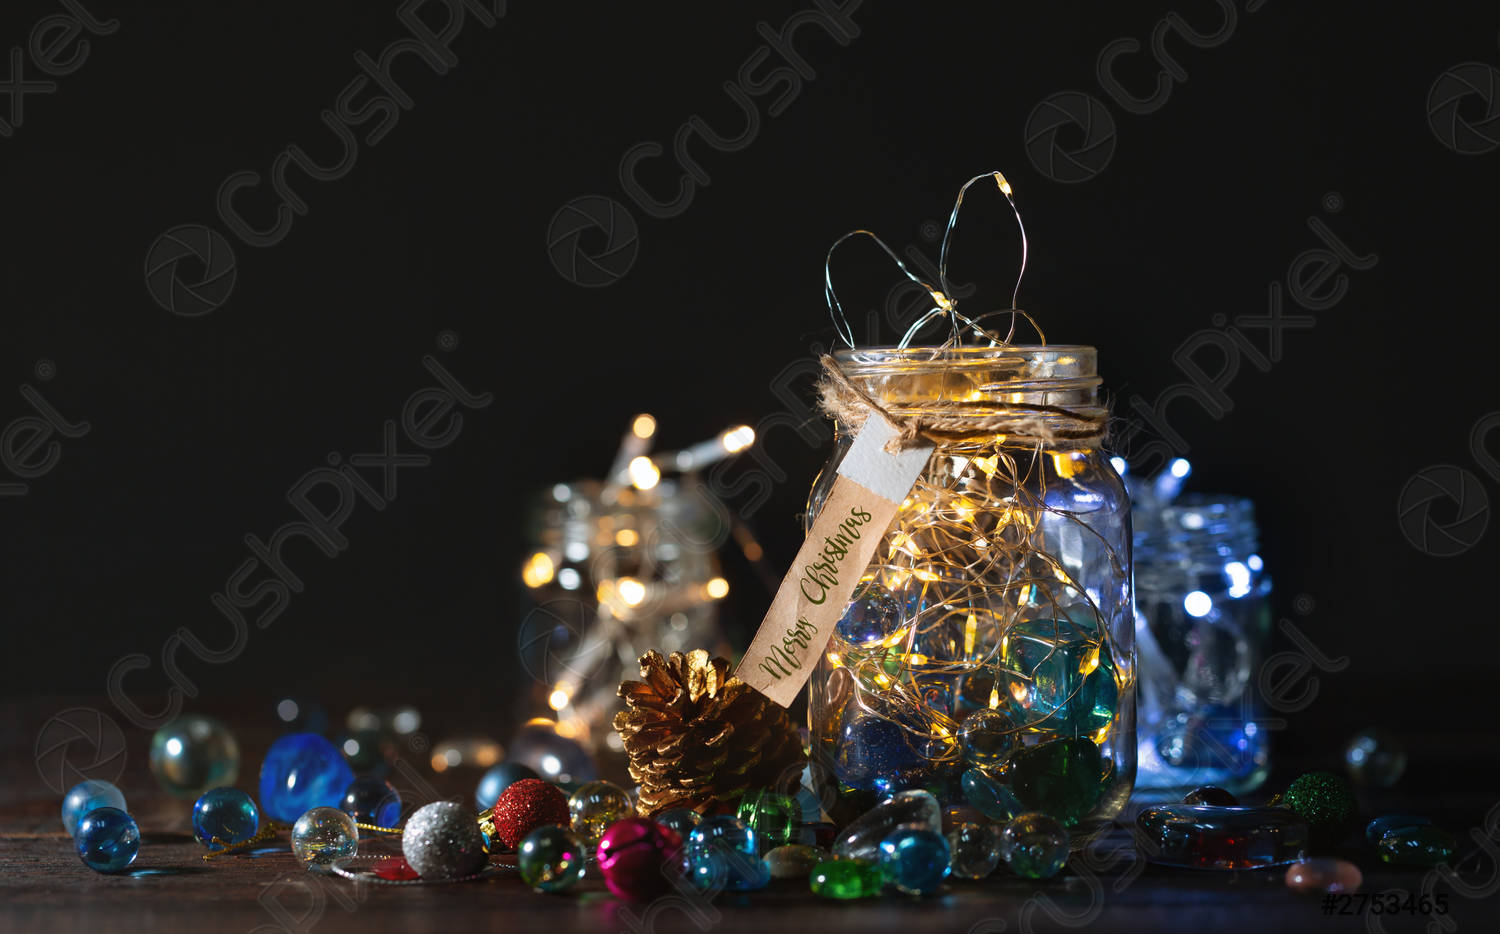 Glowing Christmas Lights and golden pine cone in a glass